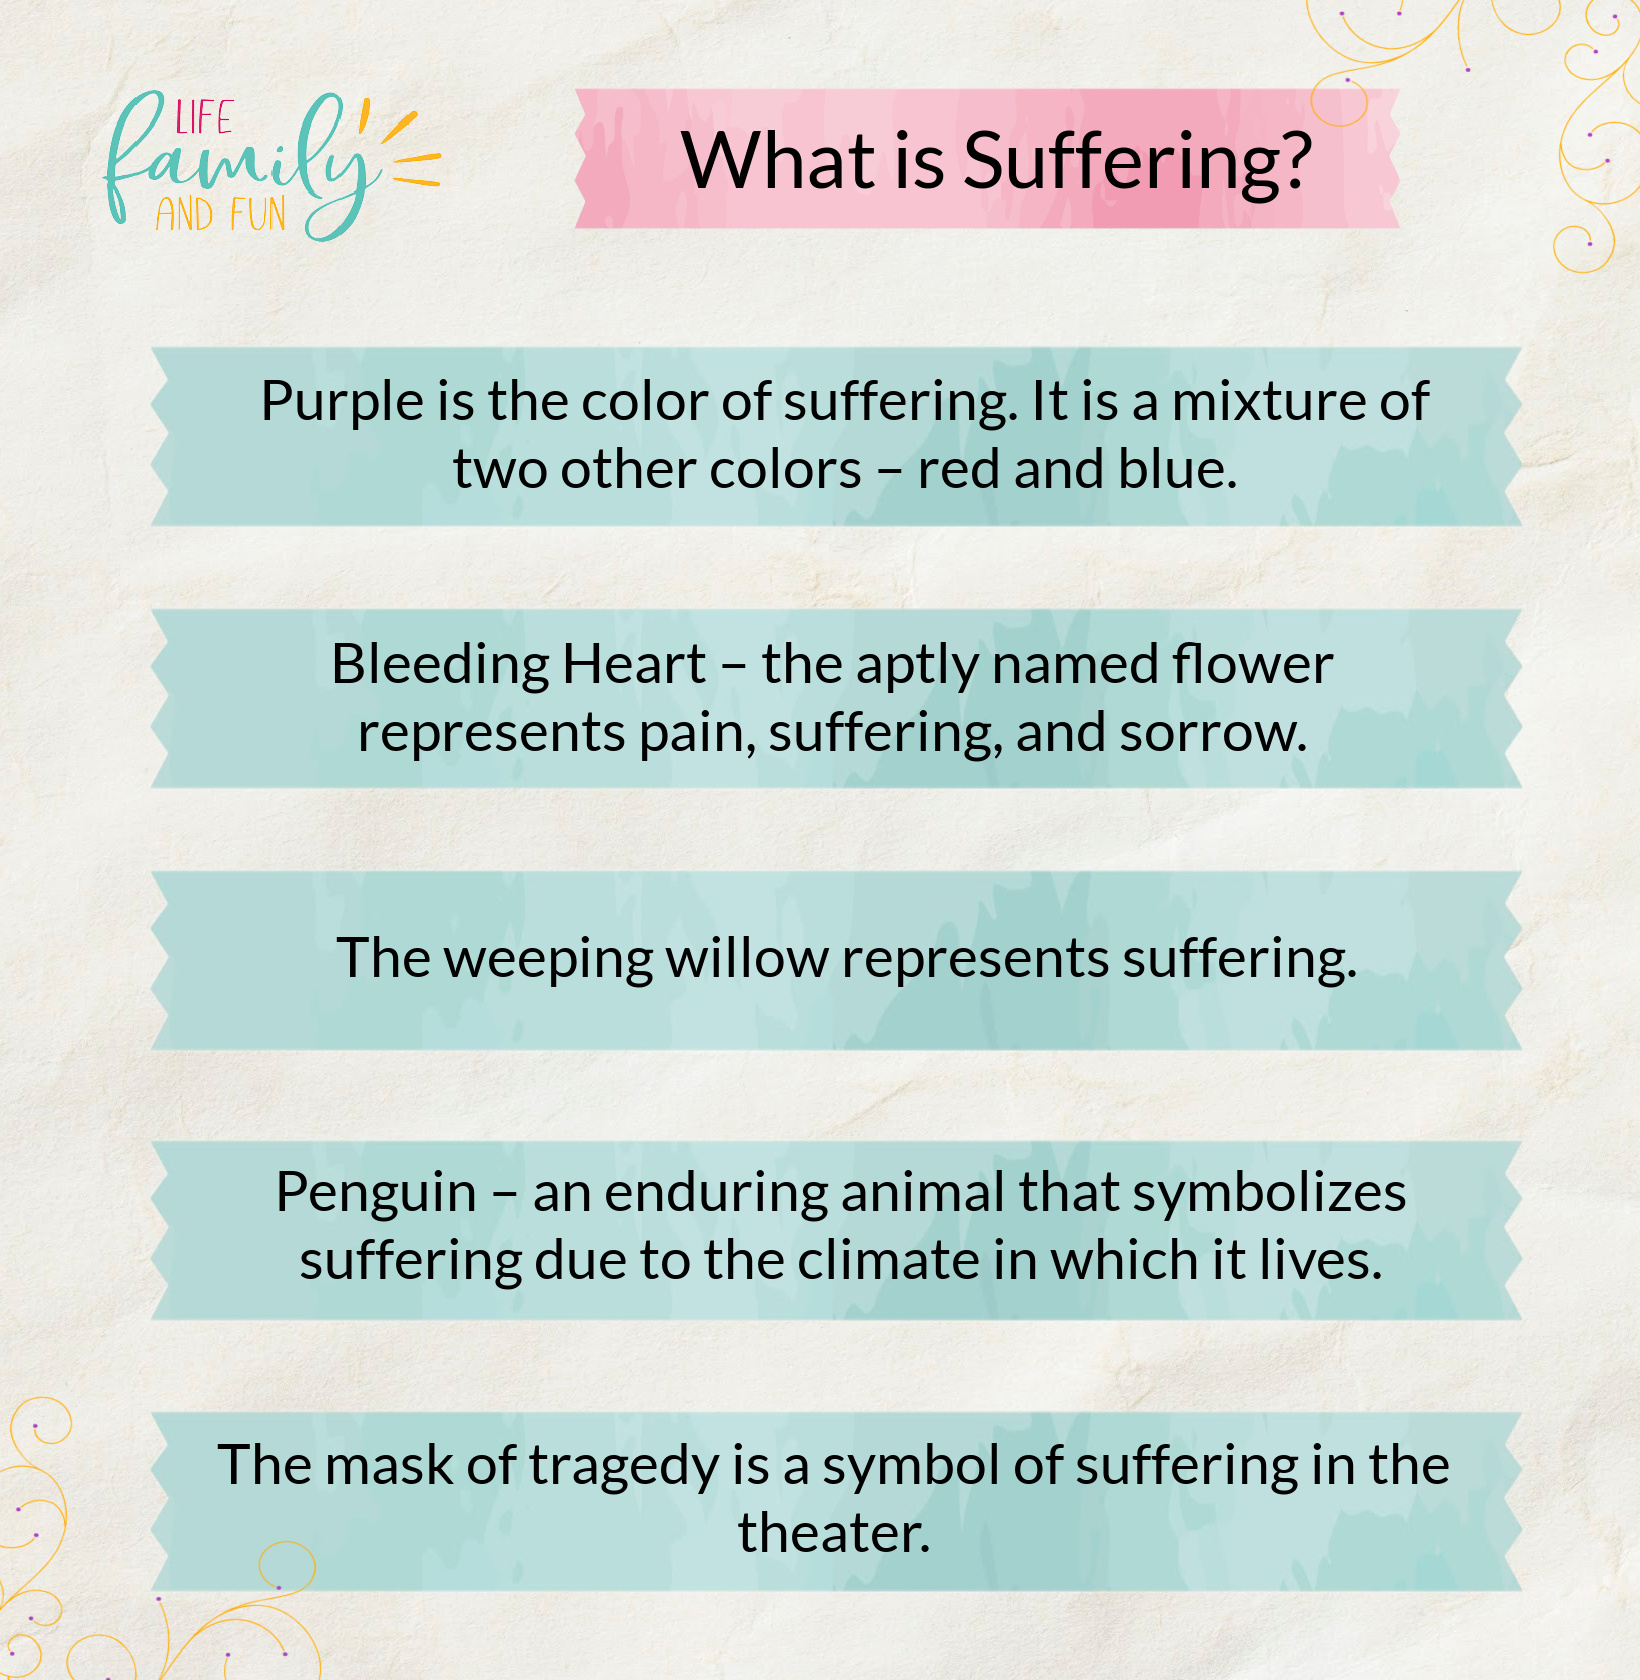 What is Suffering?